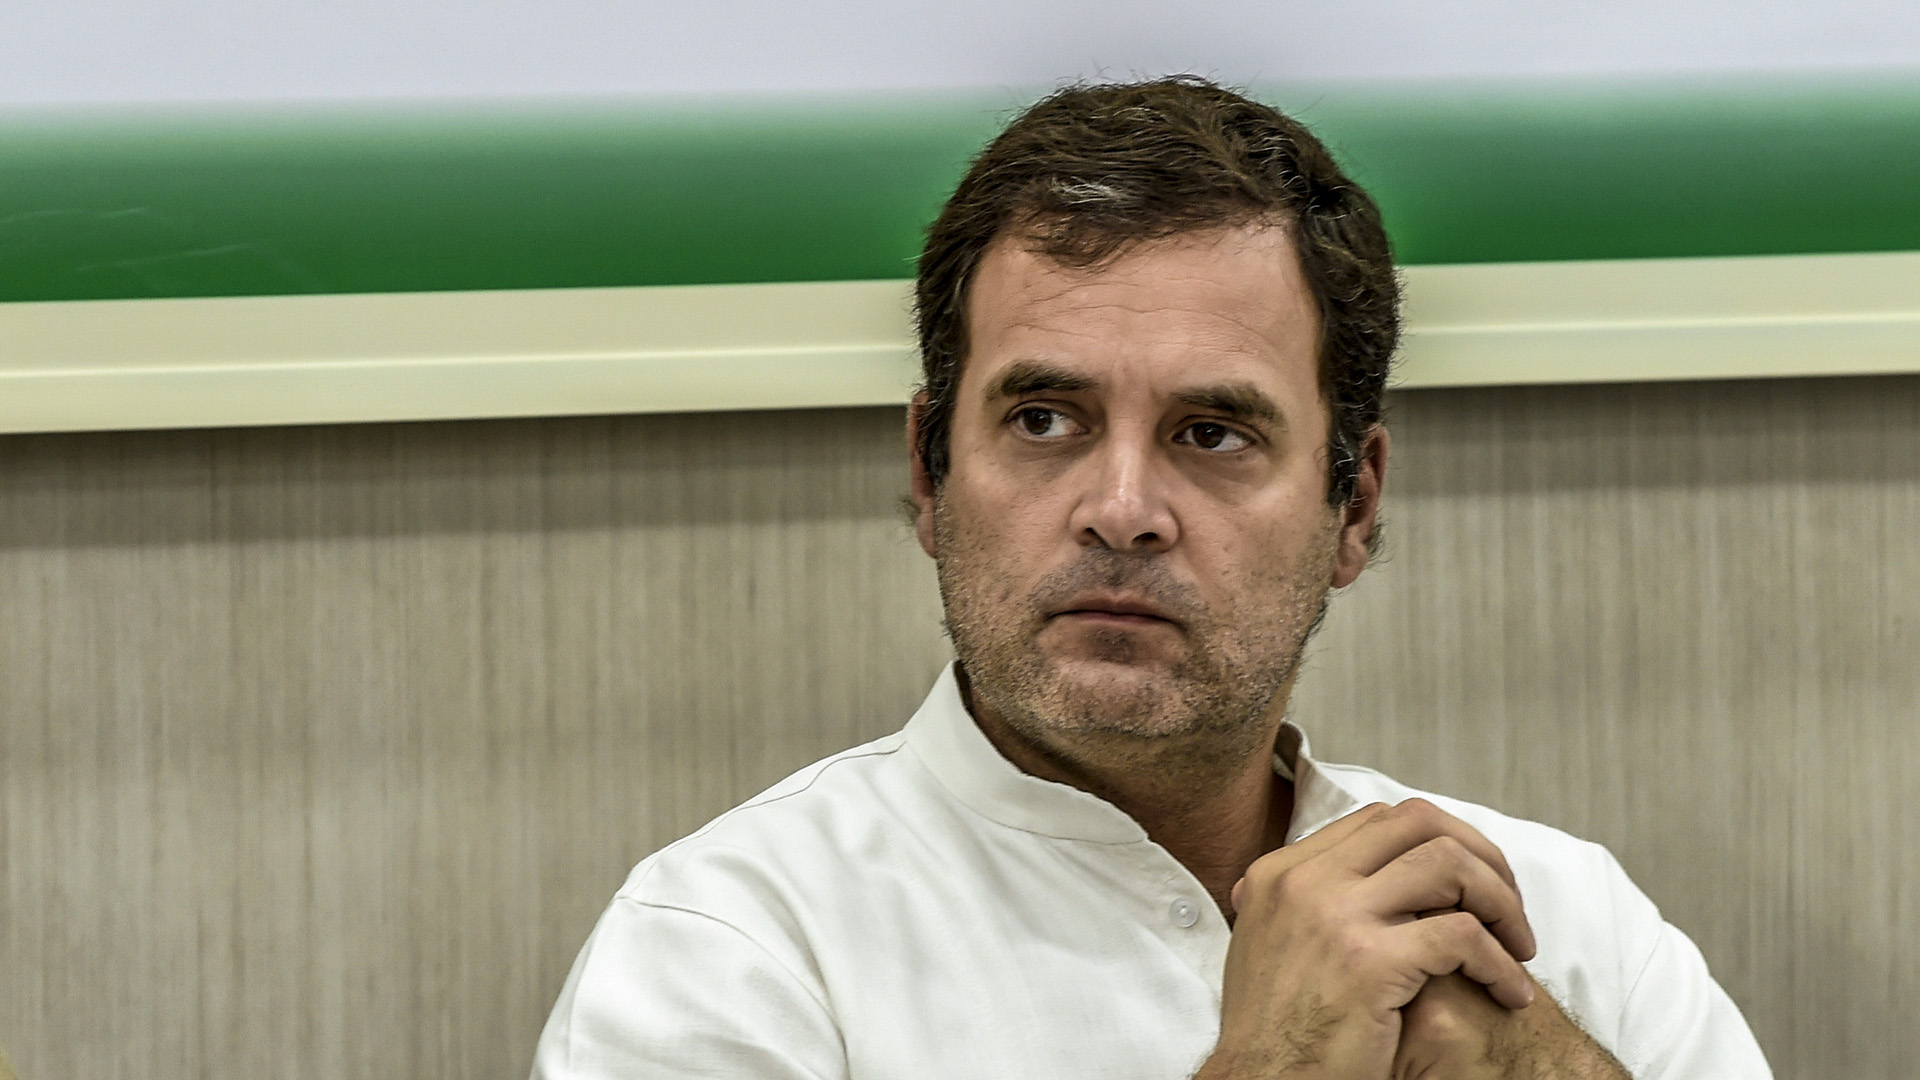 Social media sites Instagram and Facebook have removed Congress leader Rahul Gandhi's post that revealed the identity of the parents of a minor girl who was raped and murdered in Delhi. (Atul Loke/Getty Images)